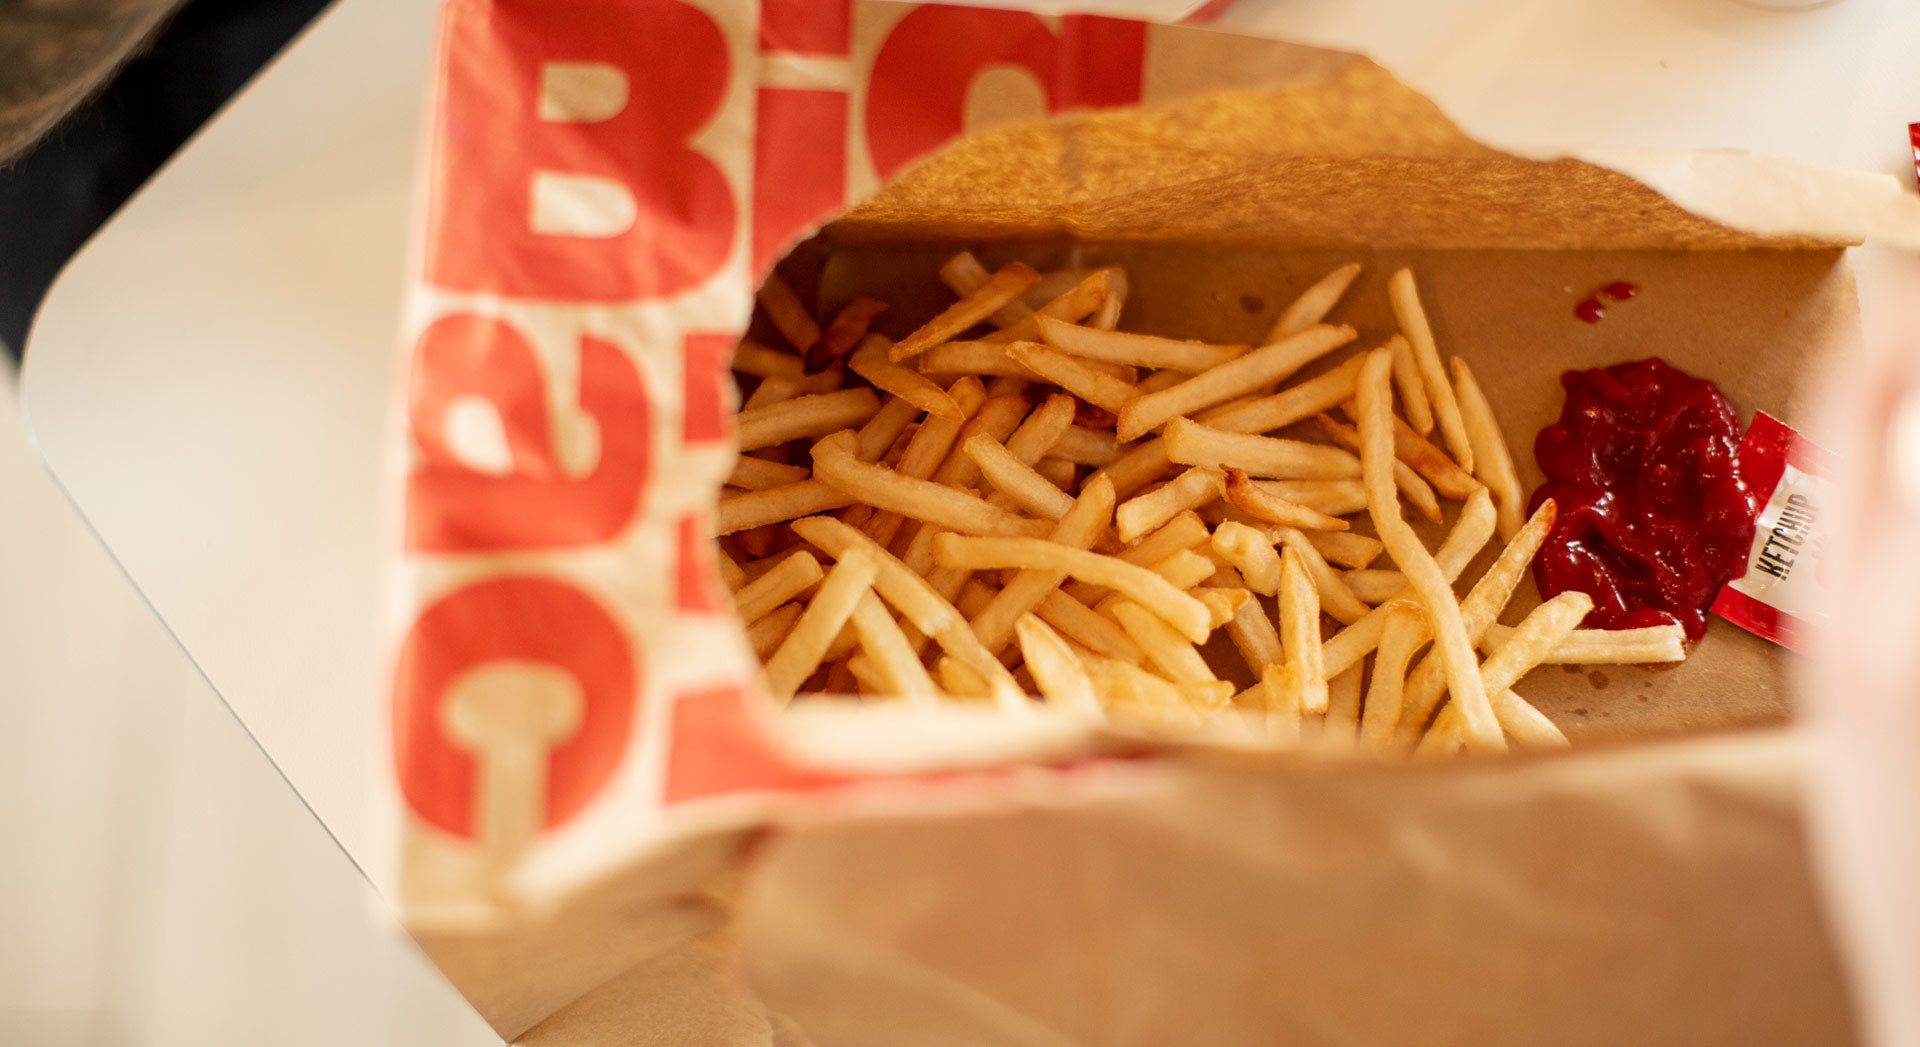 Know Our Food - Why are McDonald's French fries not baked?